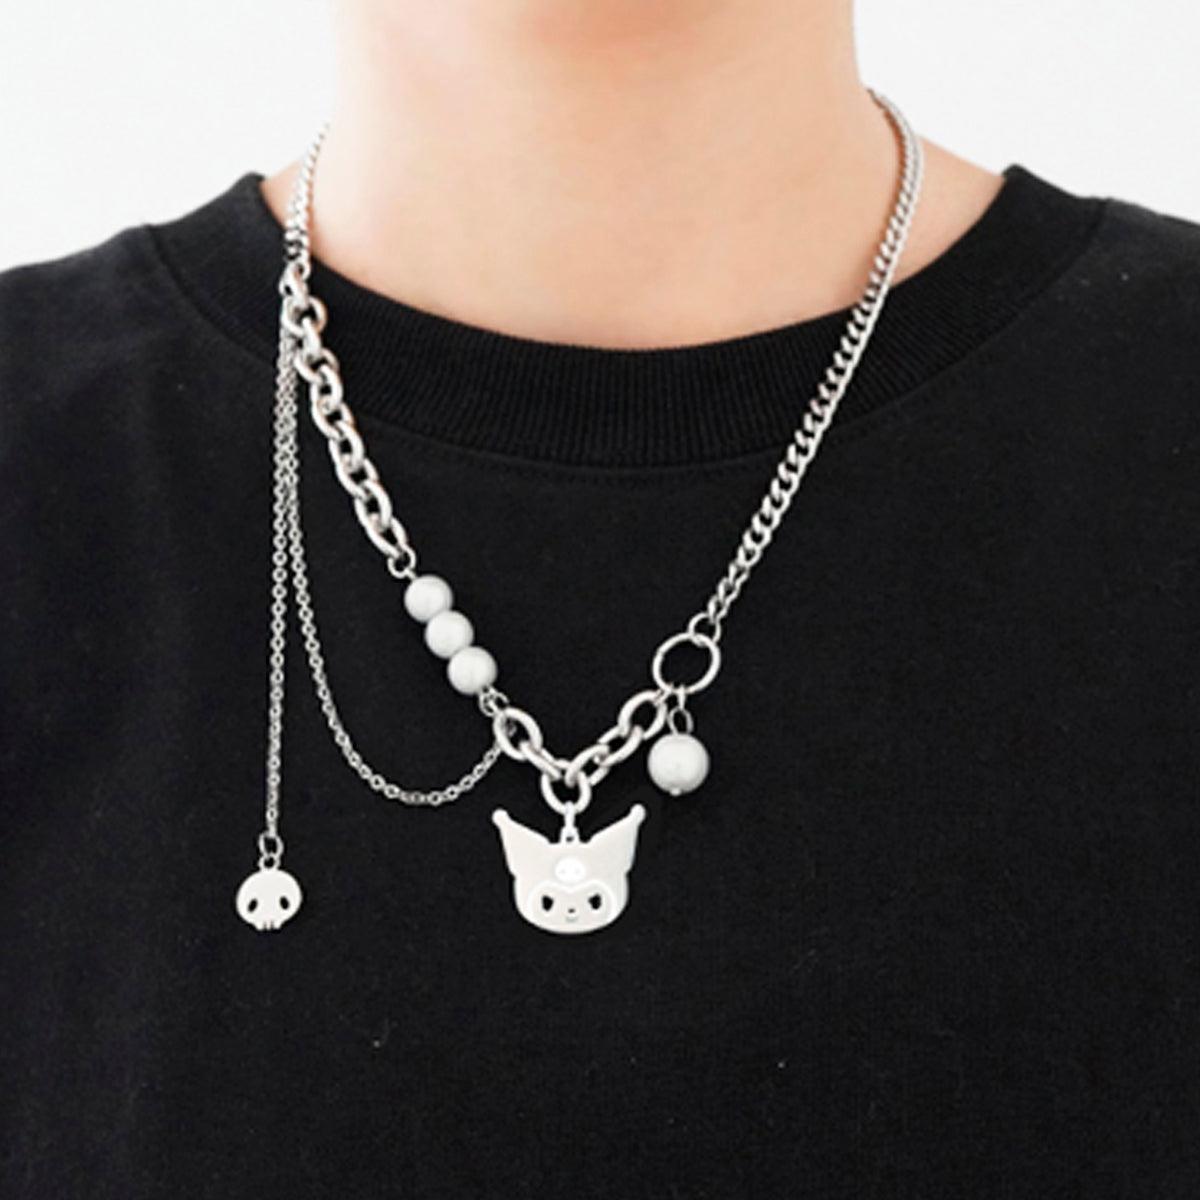 Grunge Kuromi Chain Necklace - Aesthetic Clothes Shop